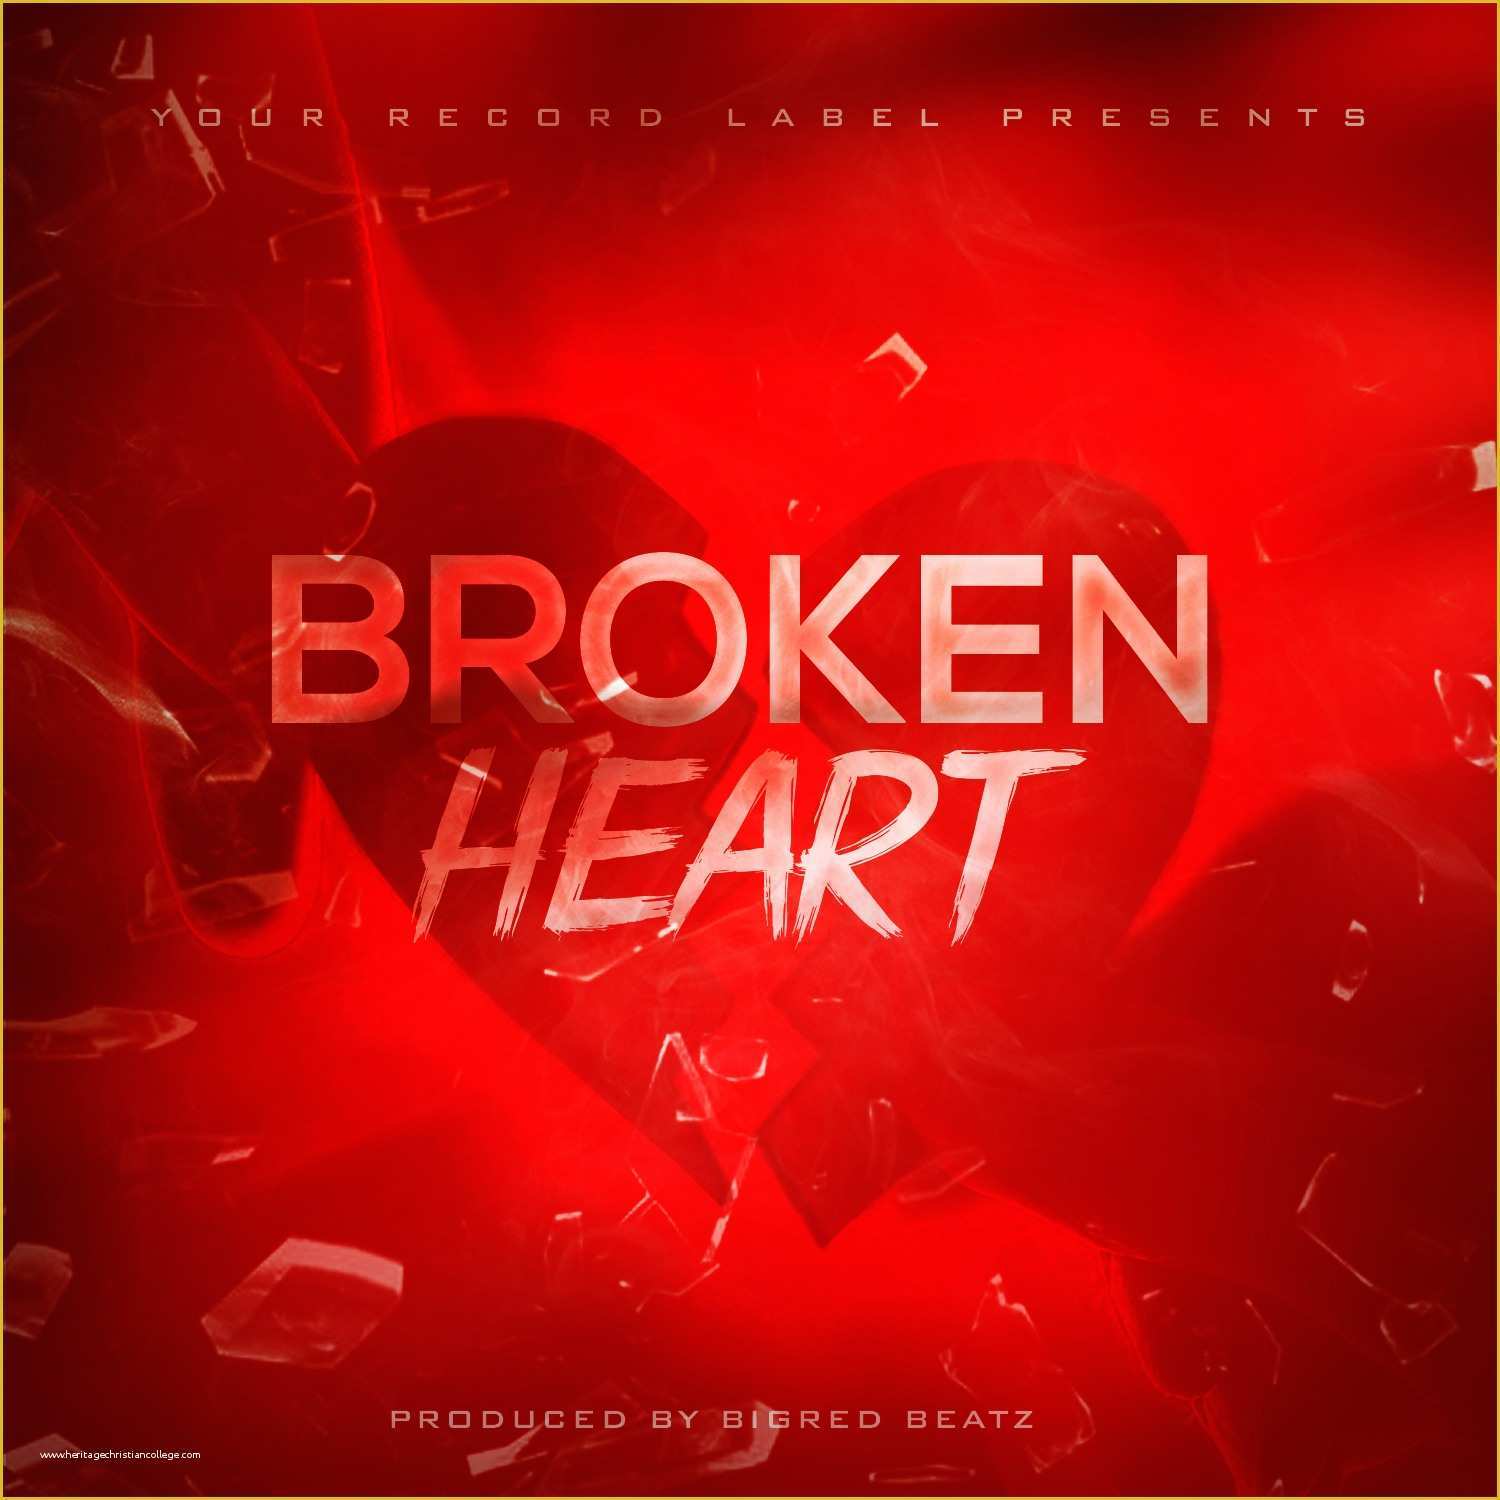 Free Mixtape Covers Templates Of Broken Hearts Free Album Cover Template